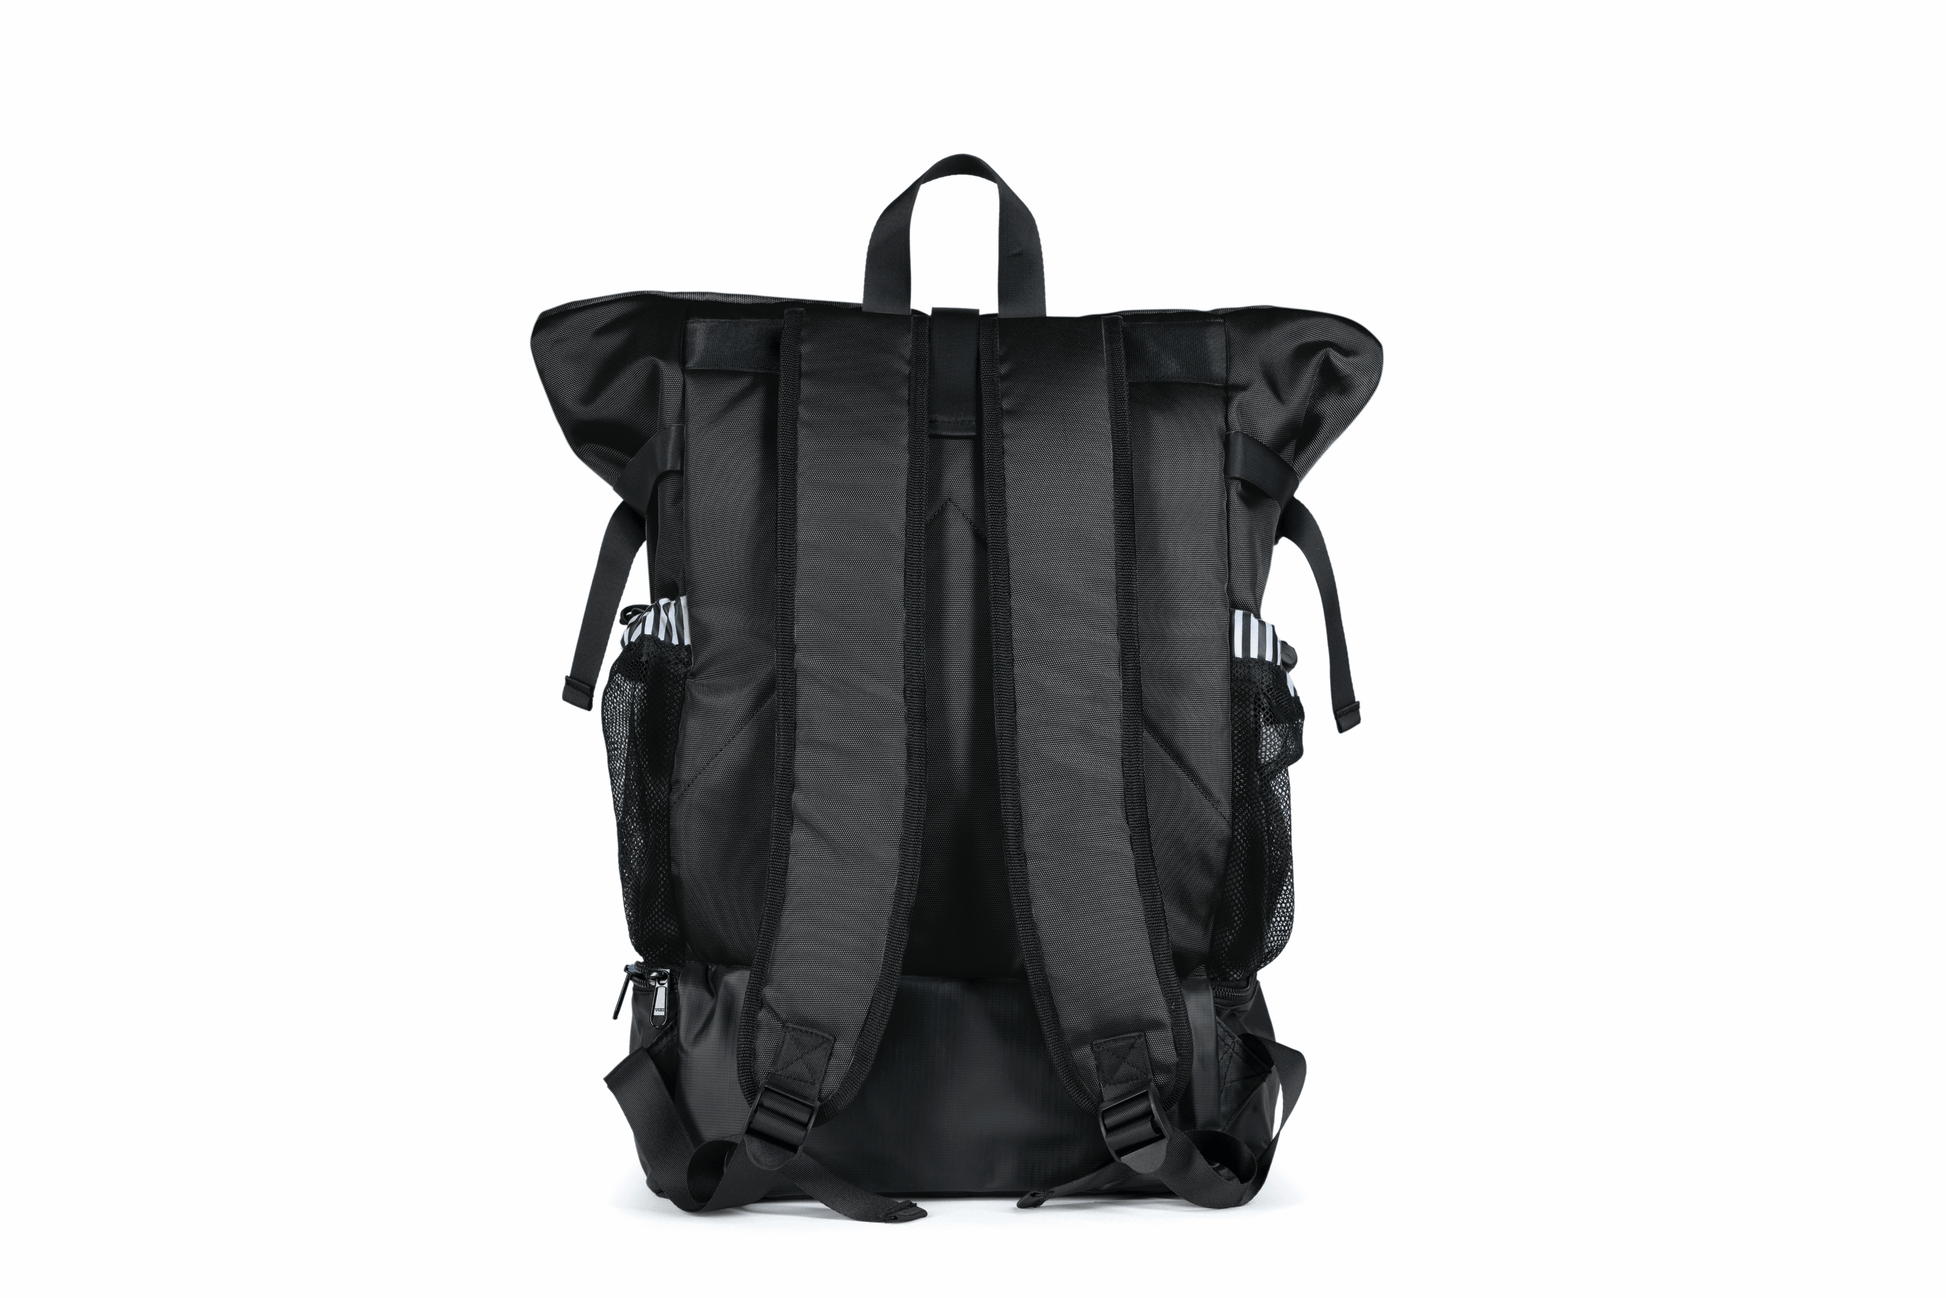 The Roo betty Nyx Back pack has padded shoulder straps for extra comfort 